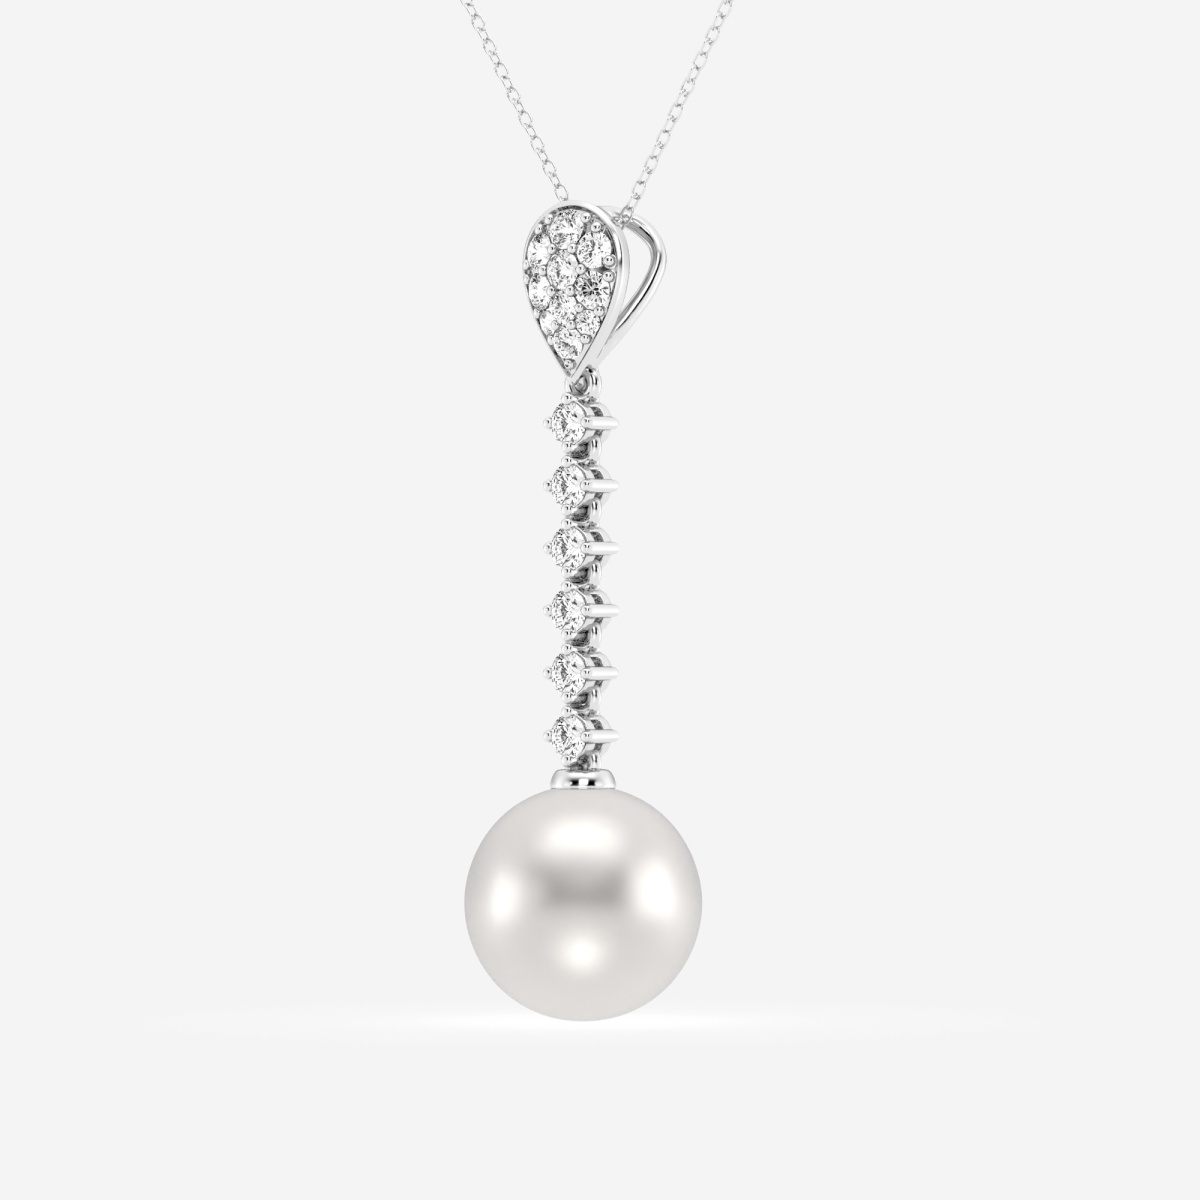 Additional Image 1 for  9.5 - 10.0 mm Cultured Freshwater Pearl and 1/2 ctw Lab Grown Diamond Linear Fashion Pendant